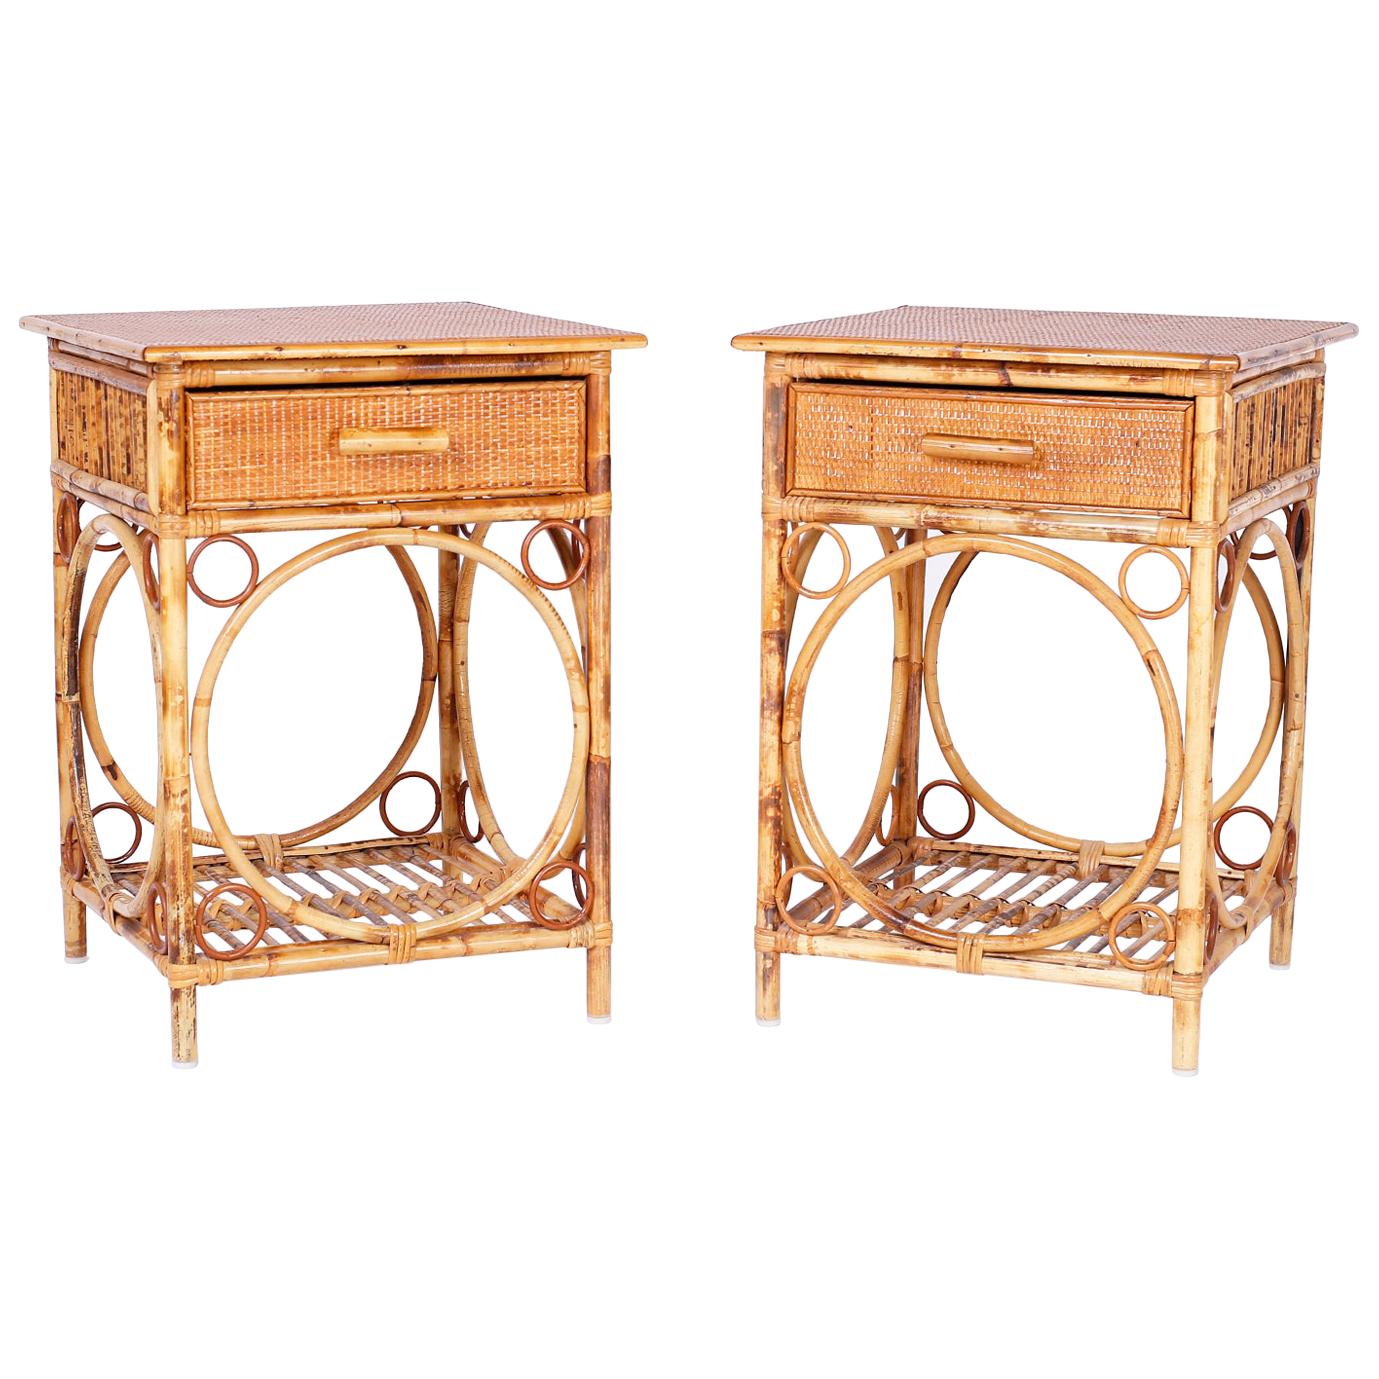 Pair of Bamboo and Grasscloth Tables or Stands